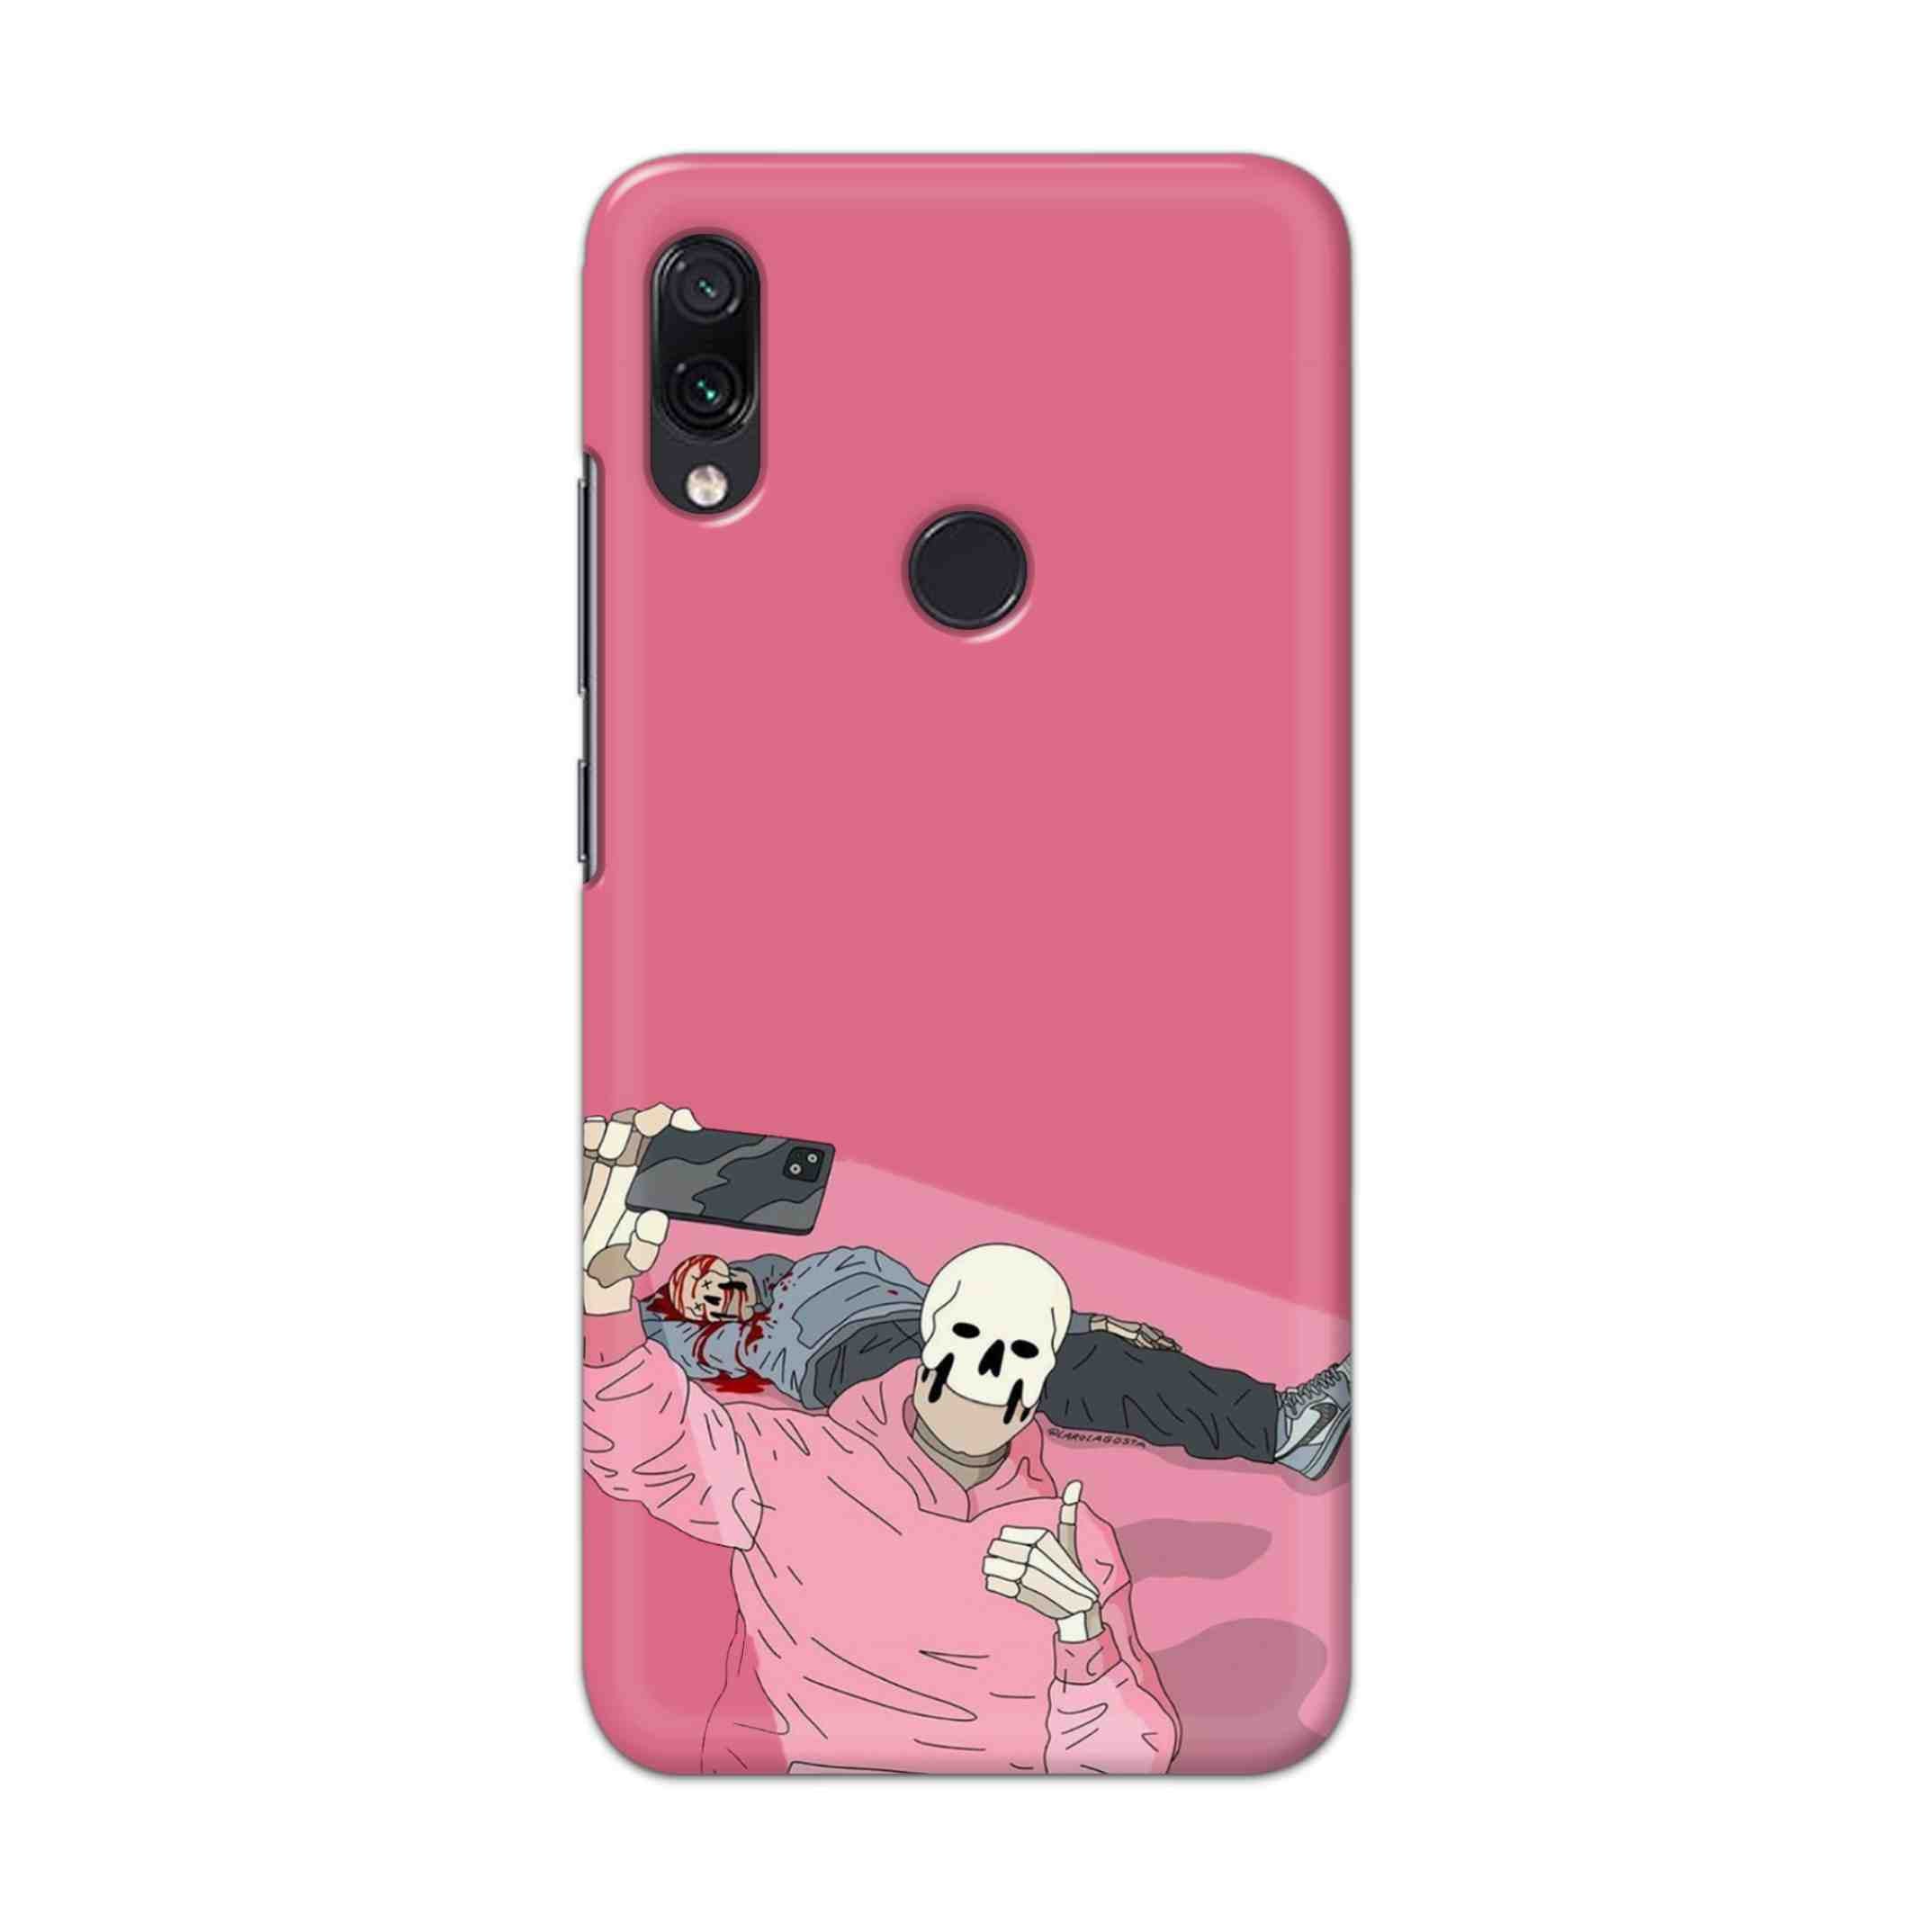 Buy Selfie Hard Back Mobile Phone Case Cover For Redmi Note 7 / Note 7 Pro Online